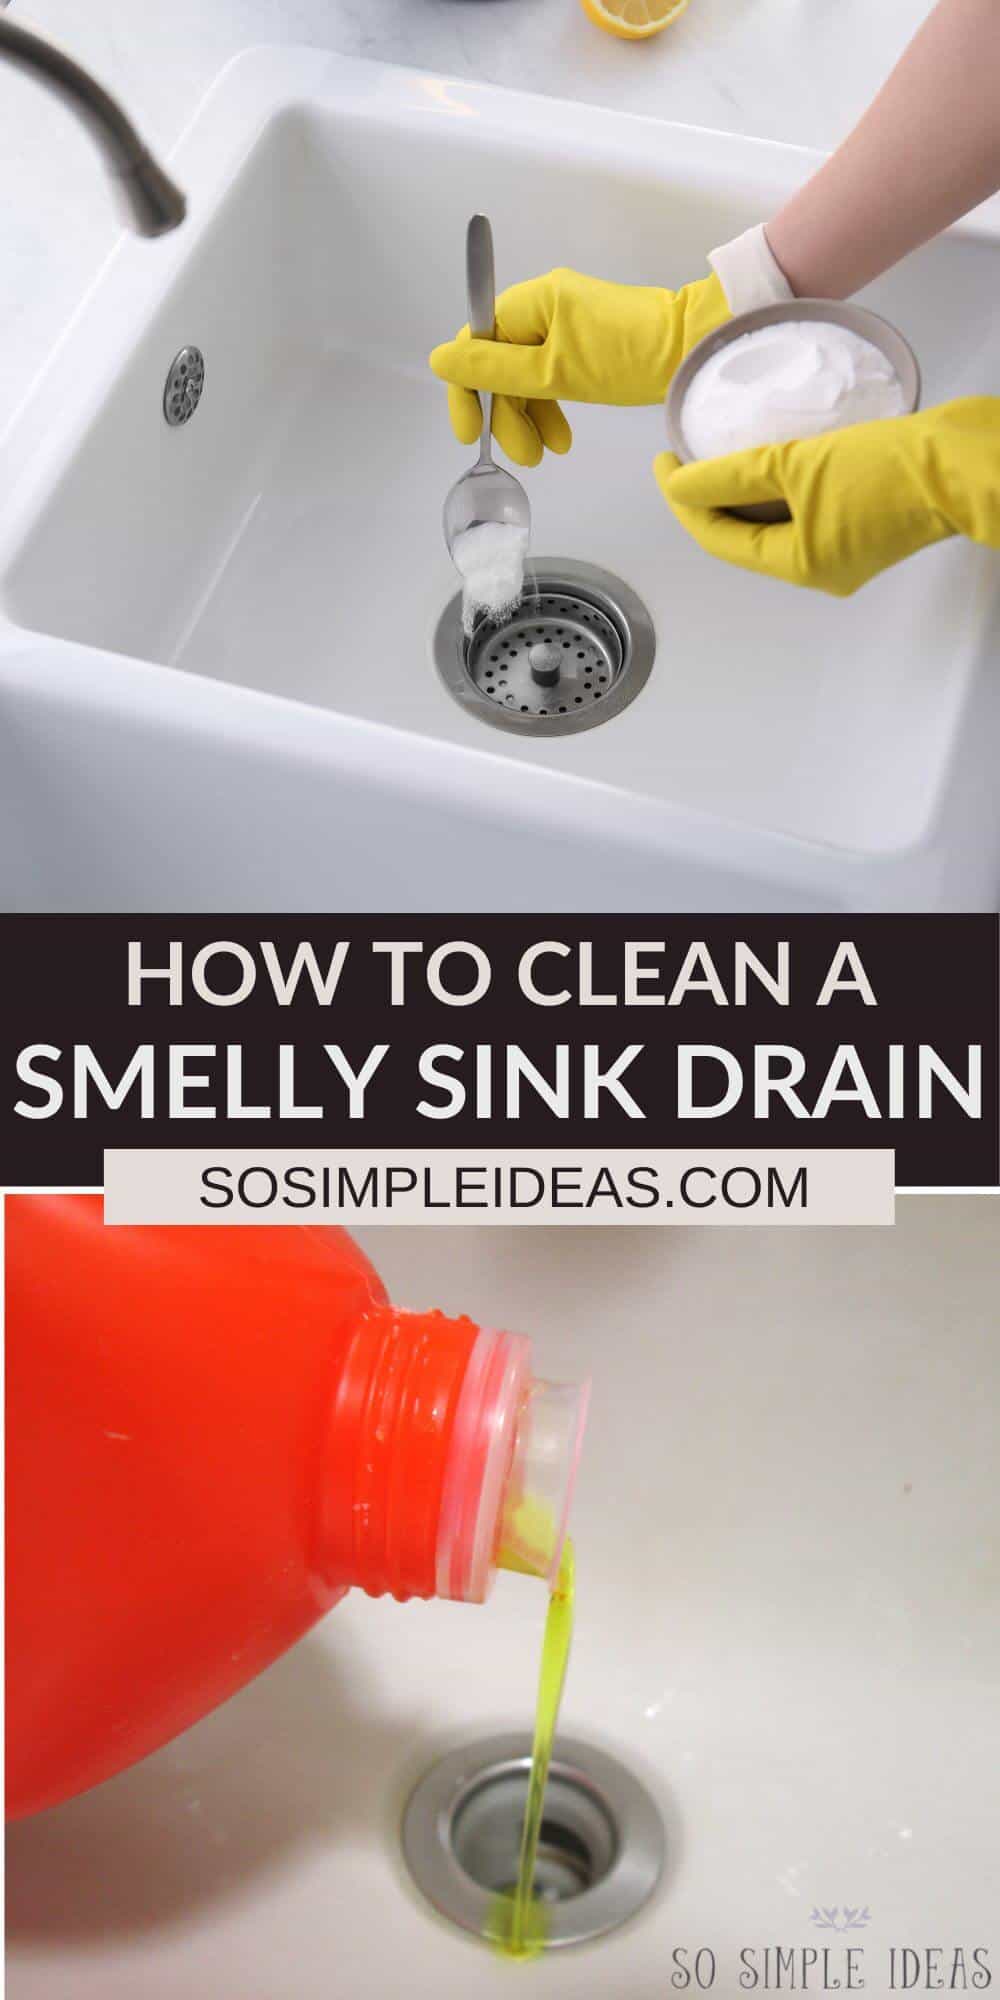 clean smelly sink drain pinterest image.